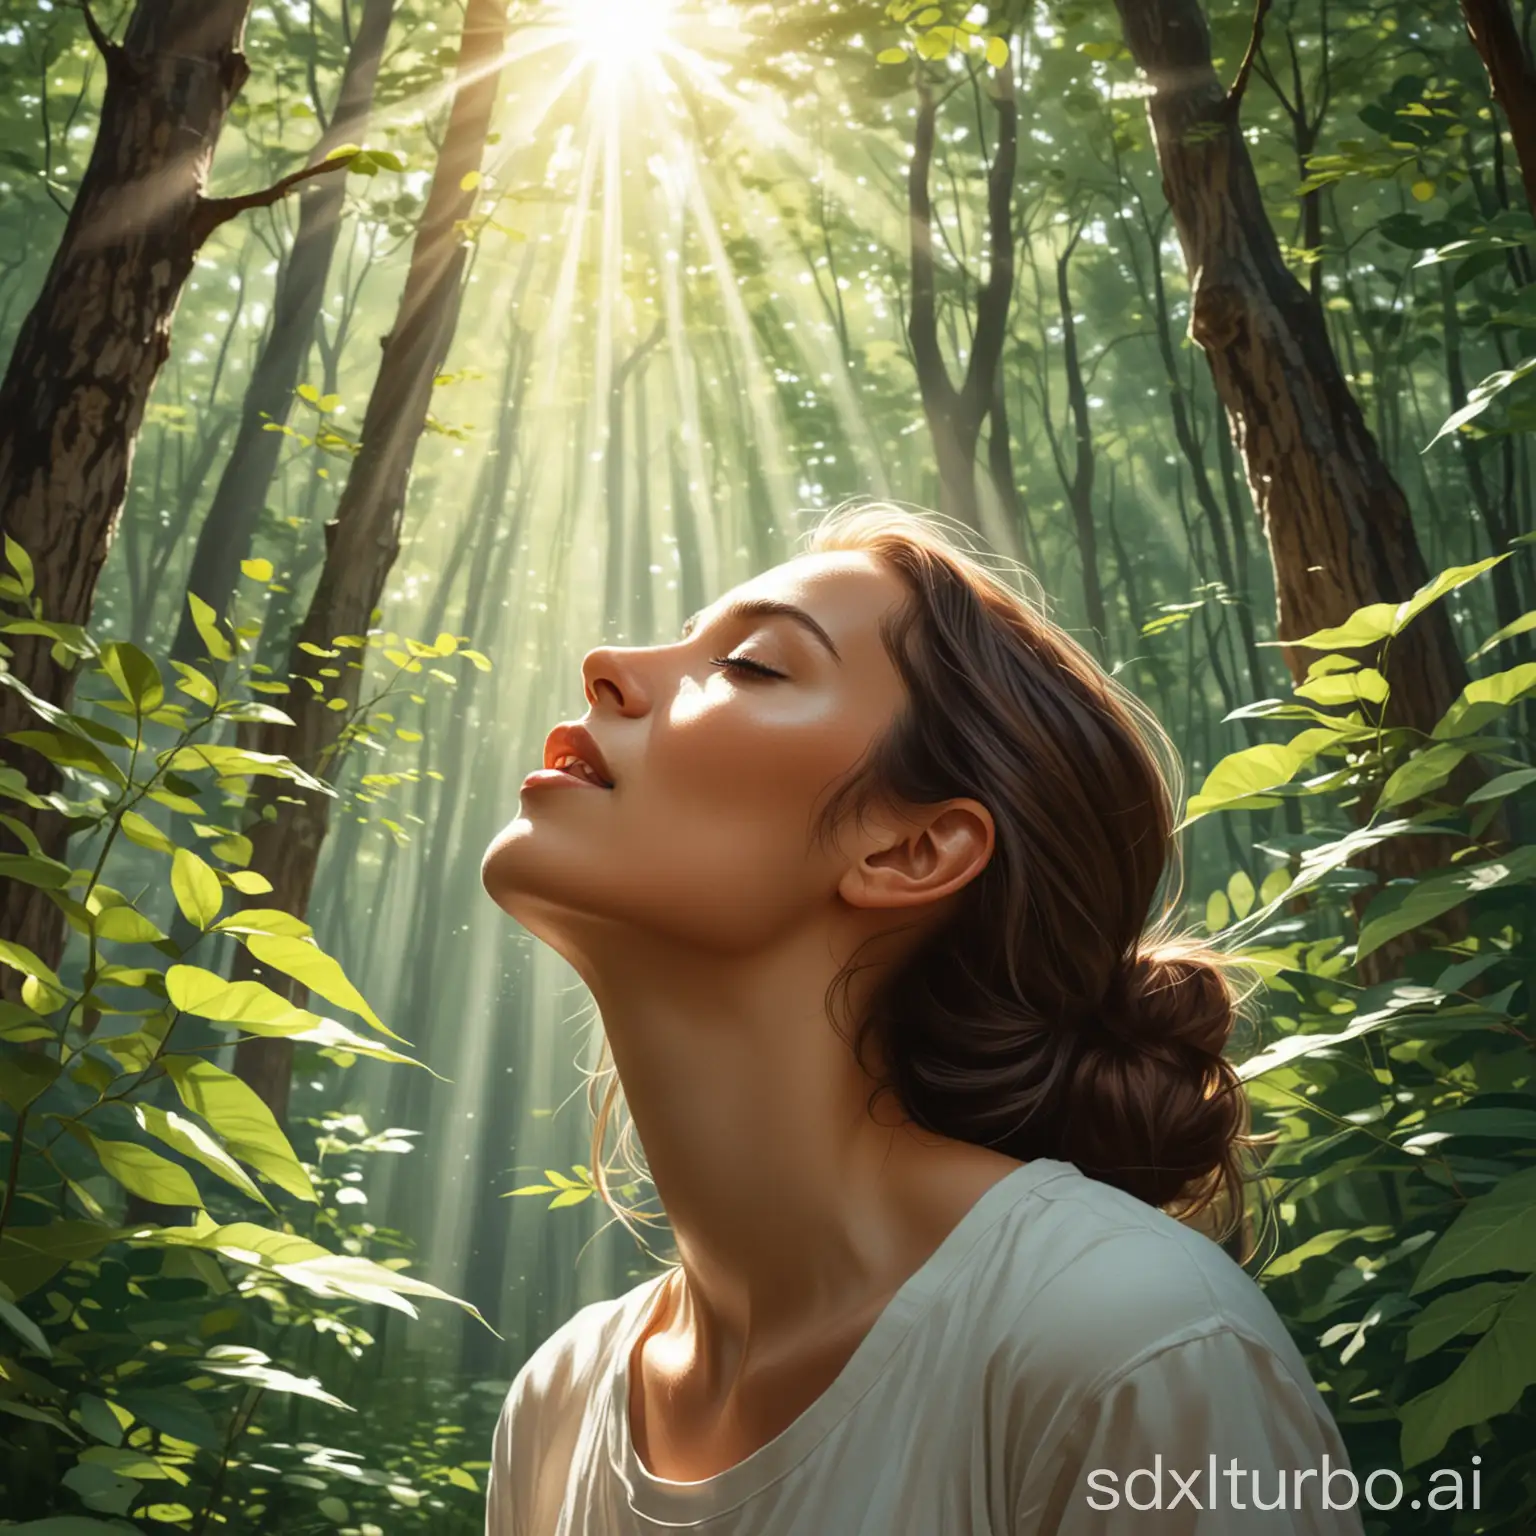 Peaceful-Forest-Meditation-Woman-Breathing-Deeply-in-Sunlit-Woods